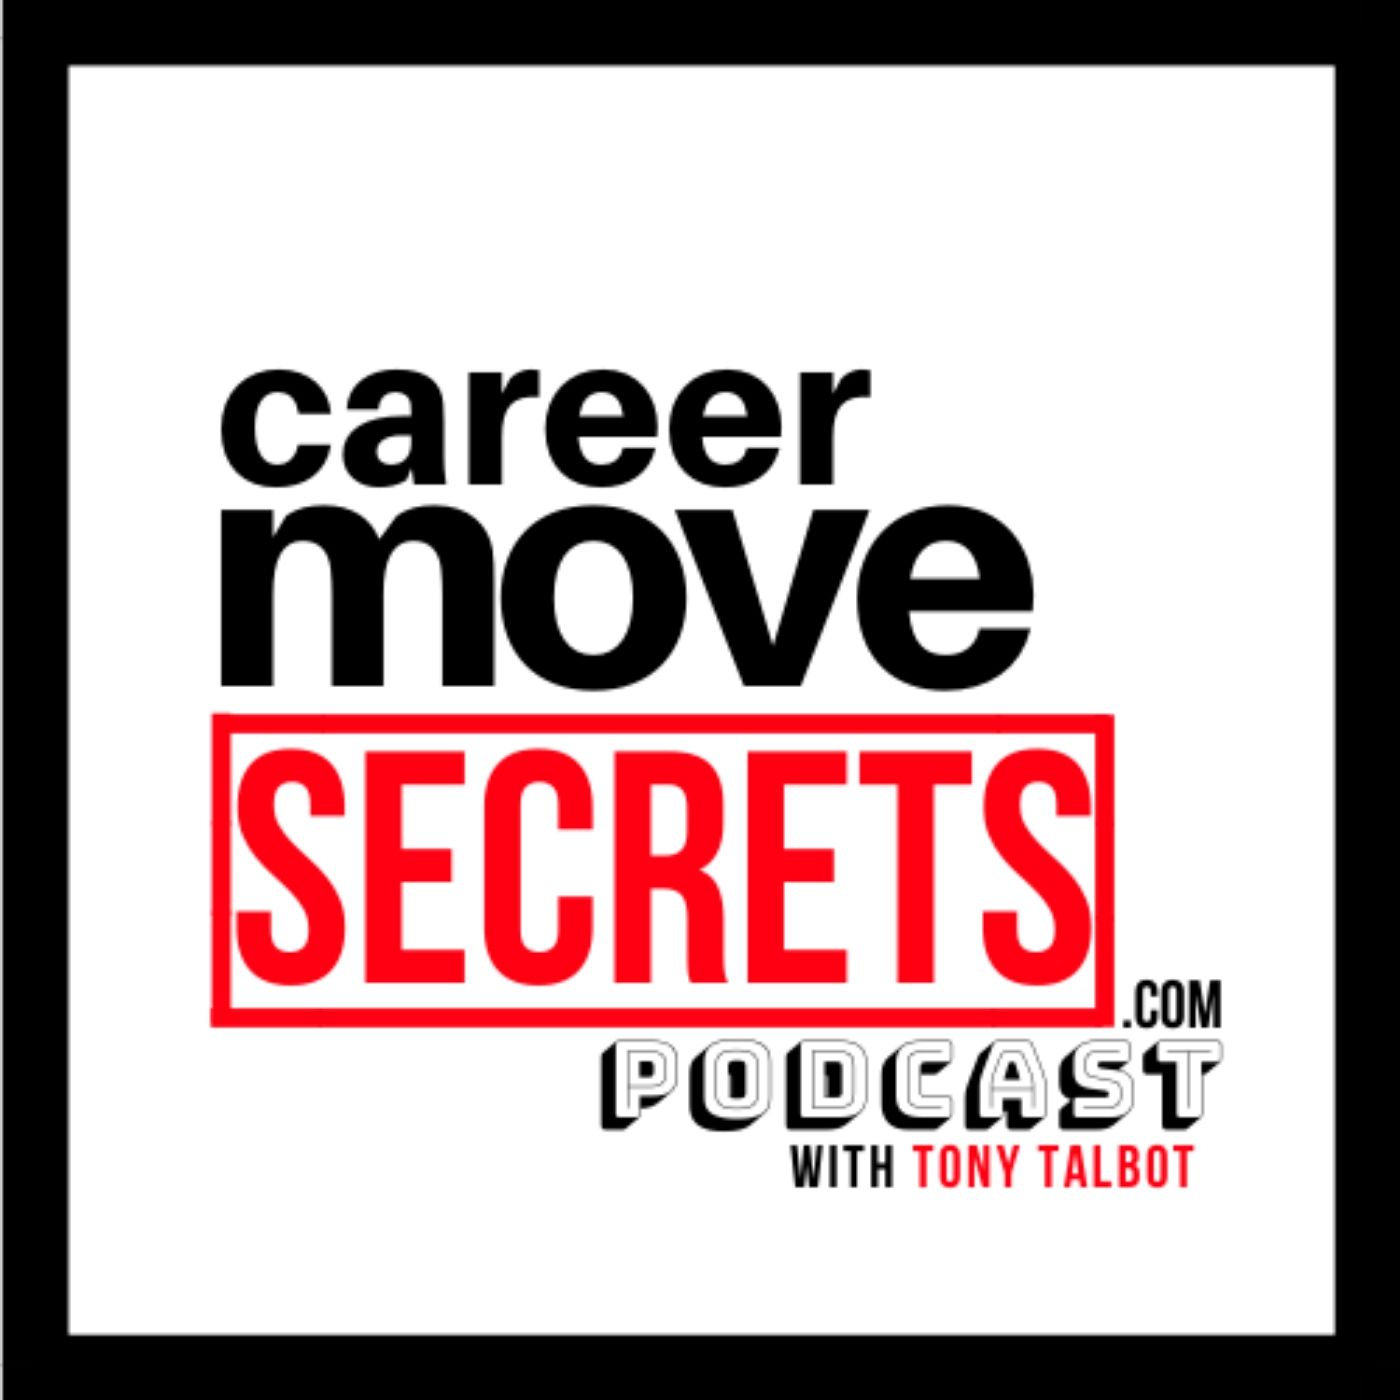 Artwork for podcast Career Move SECRETS with Tony Talbot